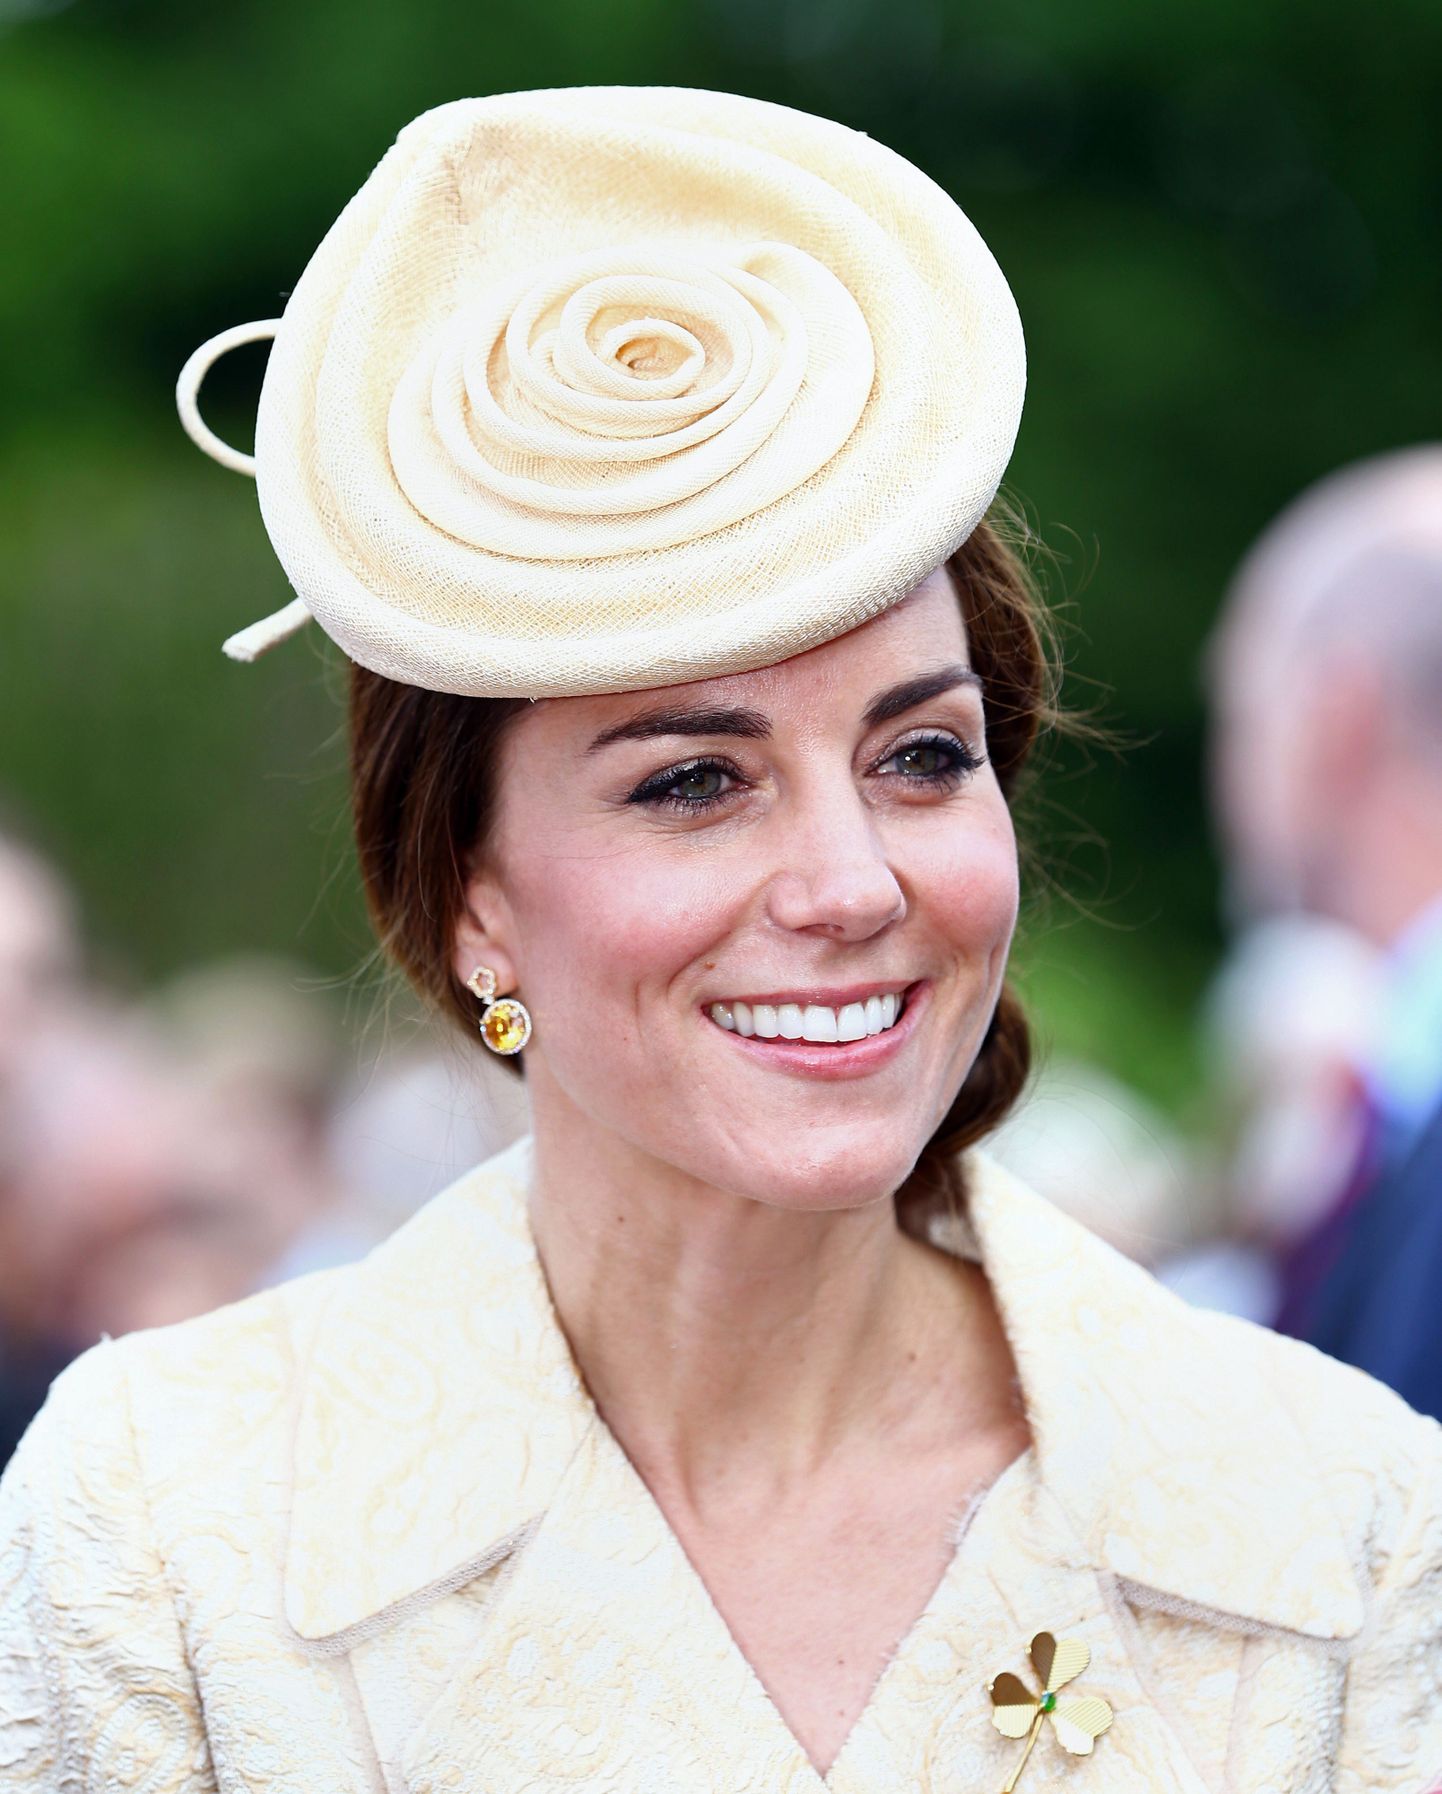 Britain's Kate, Duchess of Cambridge attends the Secretary of State for Northern Ireland Theresa Villiers' garden party at the royal residence at Hillsborough Castle, Northern Ireland, Tuesday June 14, 2016. (Brian Lawless/PA via AP) UNITED KINGDOM OUT NO SALES NO ARCHIVE